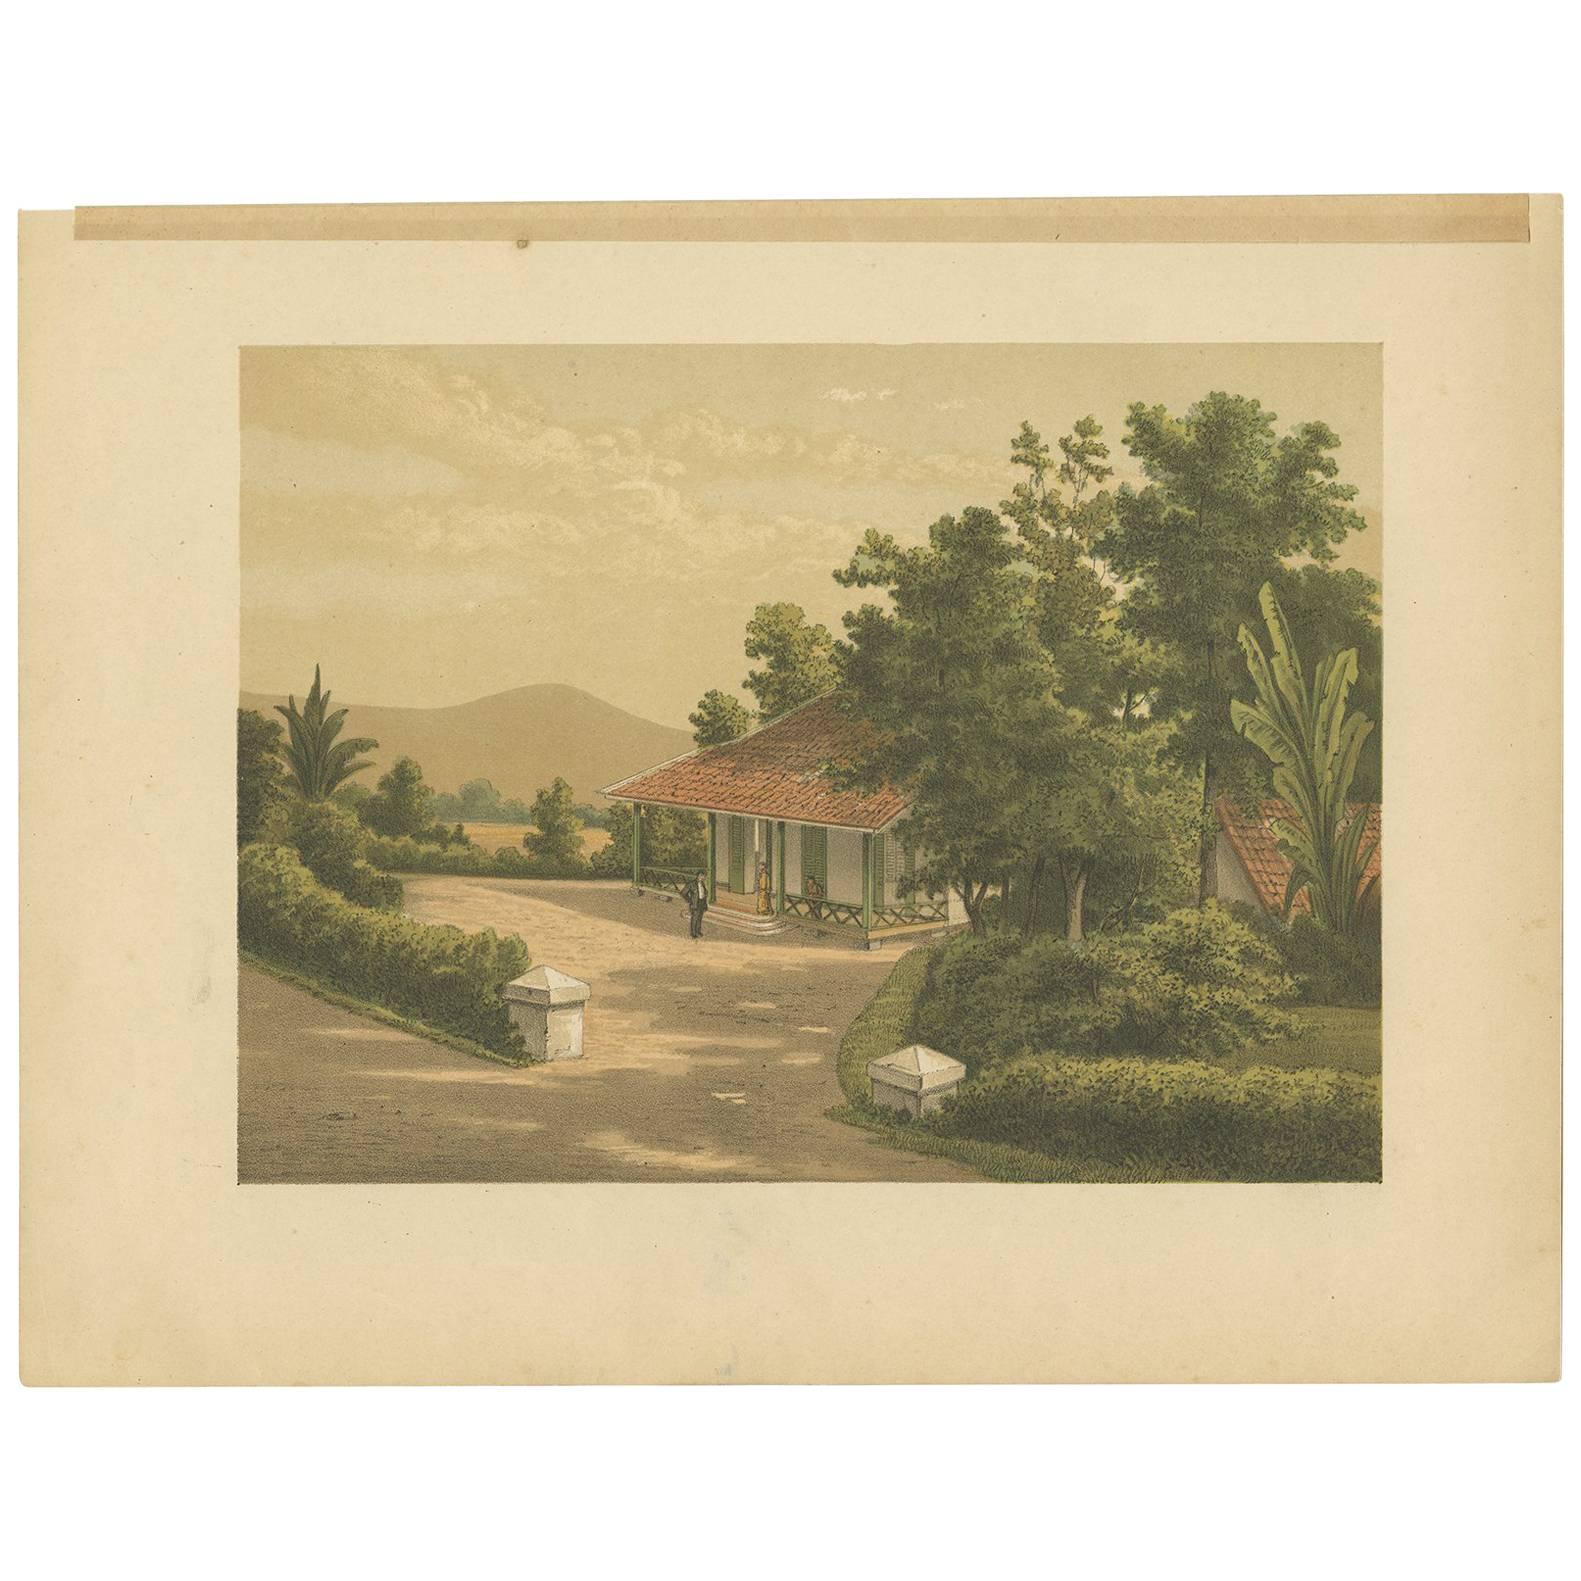 Antique Print of the Residence of Mr. V. Meurs 'Java' by M.T.H. Perelaer, 1888